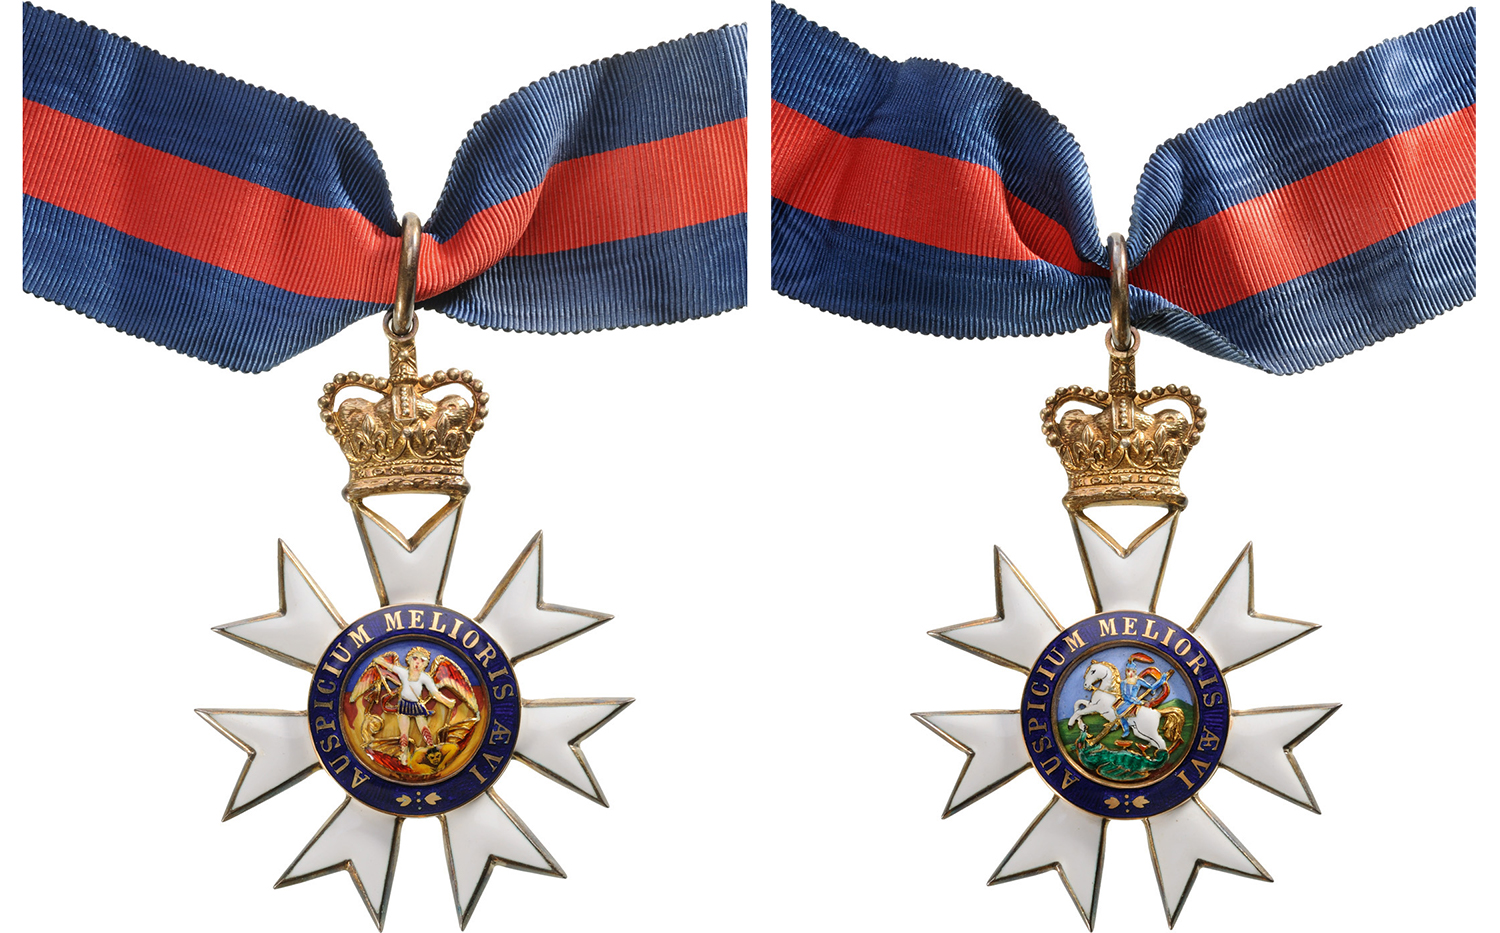 THE MOST DISTINGUISHED ORDER OF SAINT MICHAEL AND SAINT GEORGE